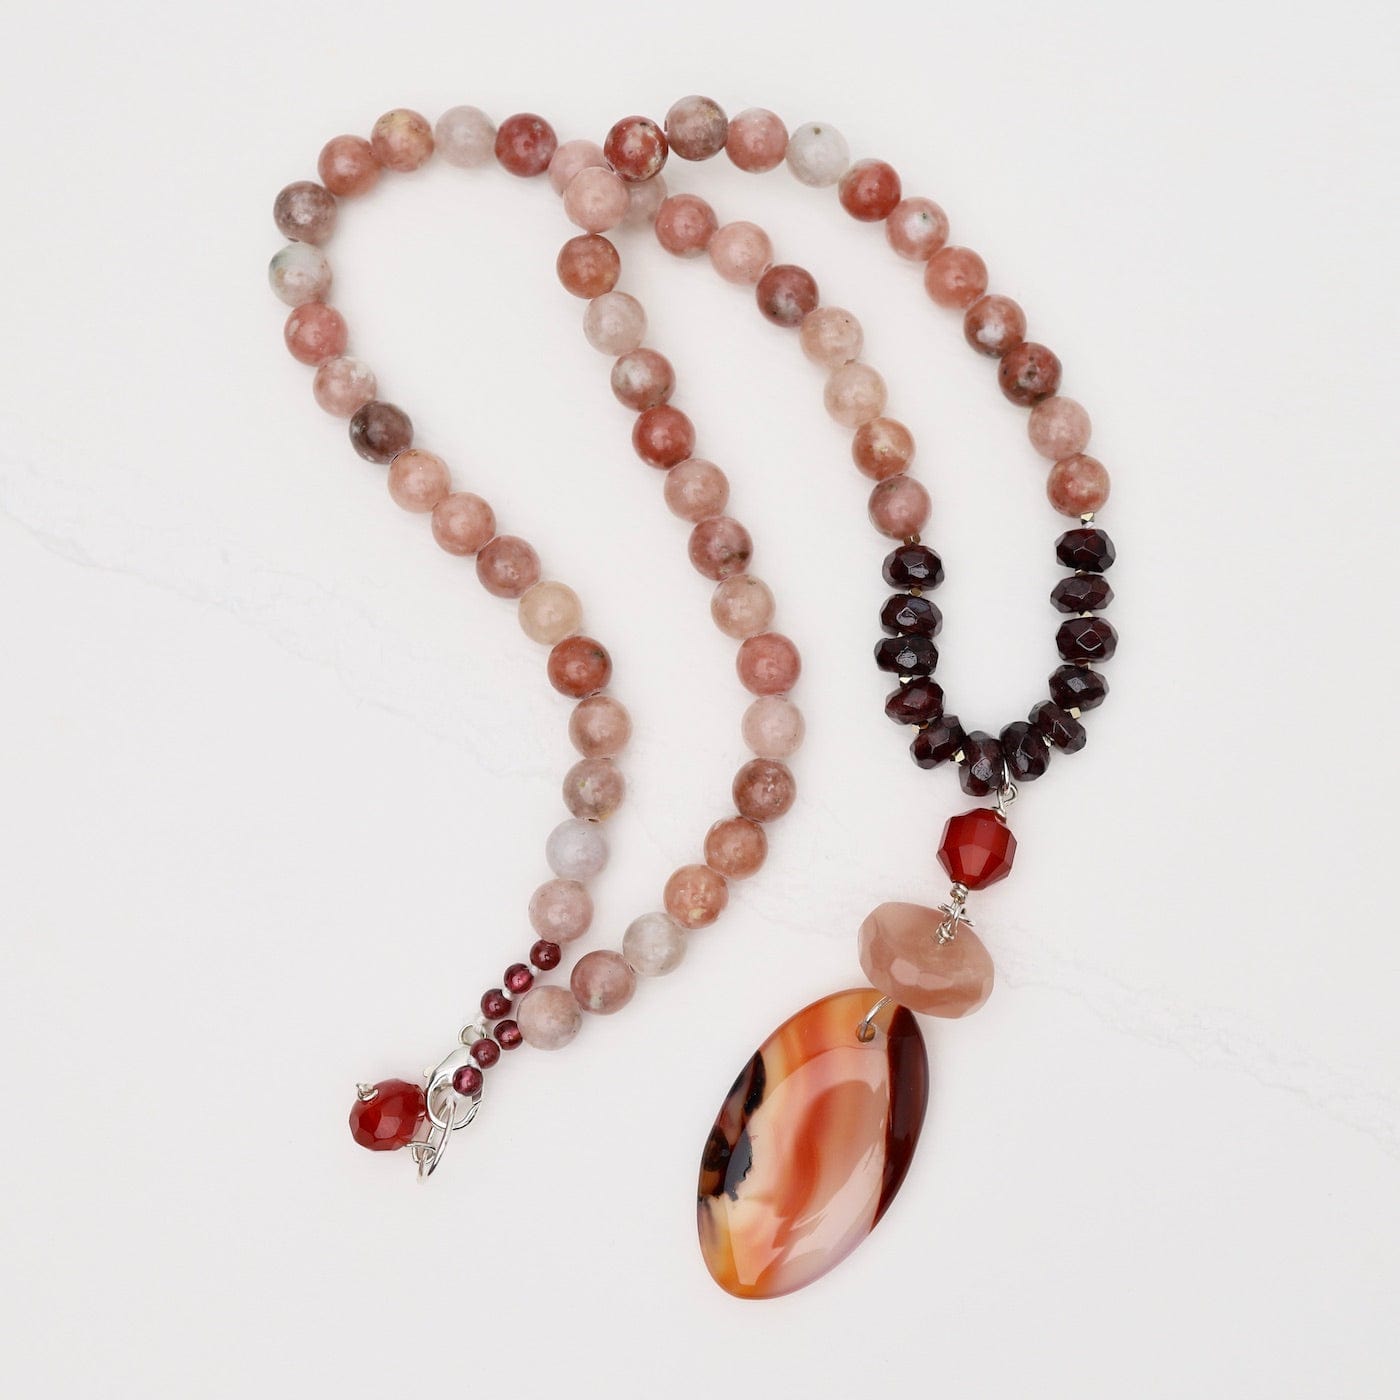 NKL Pink Stone Mix Necklace